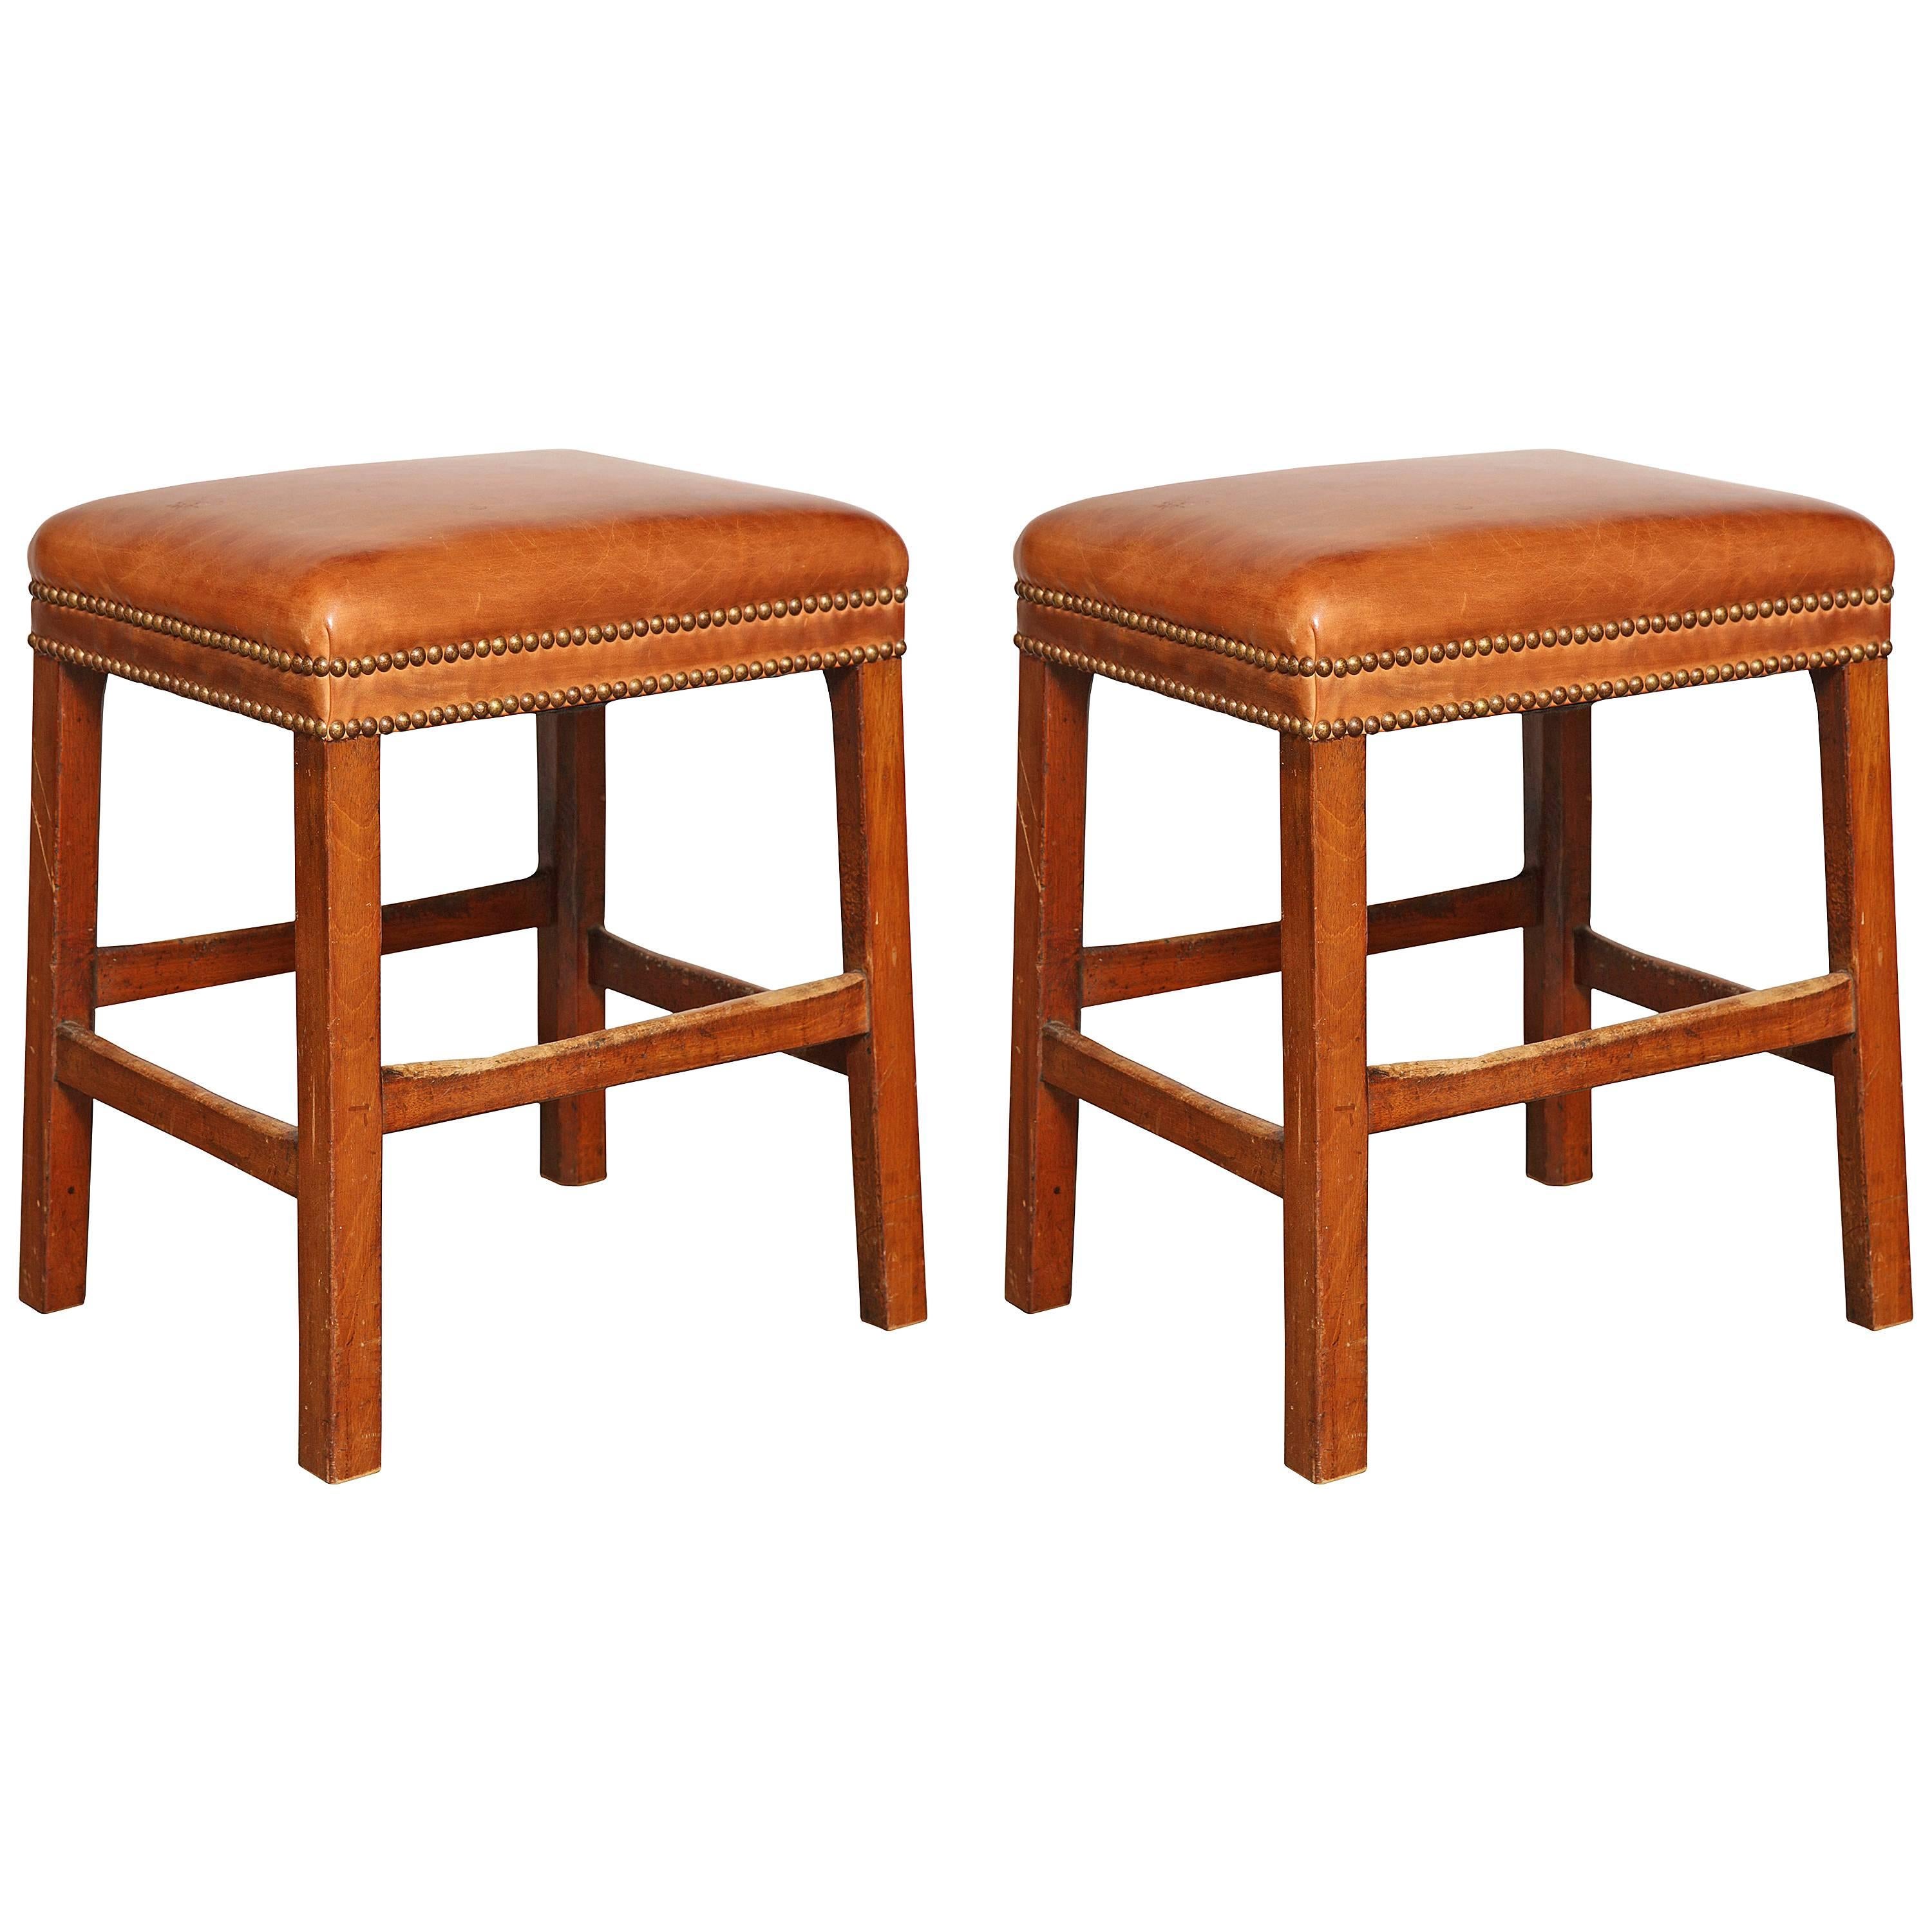 Pair of Antique Stools with Leather Seats